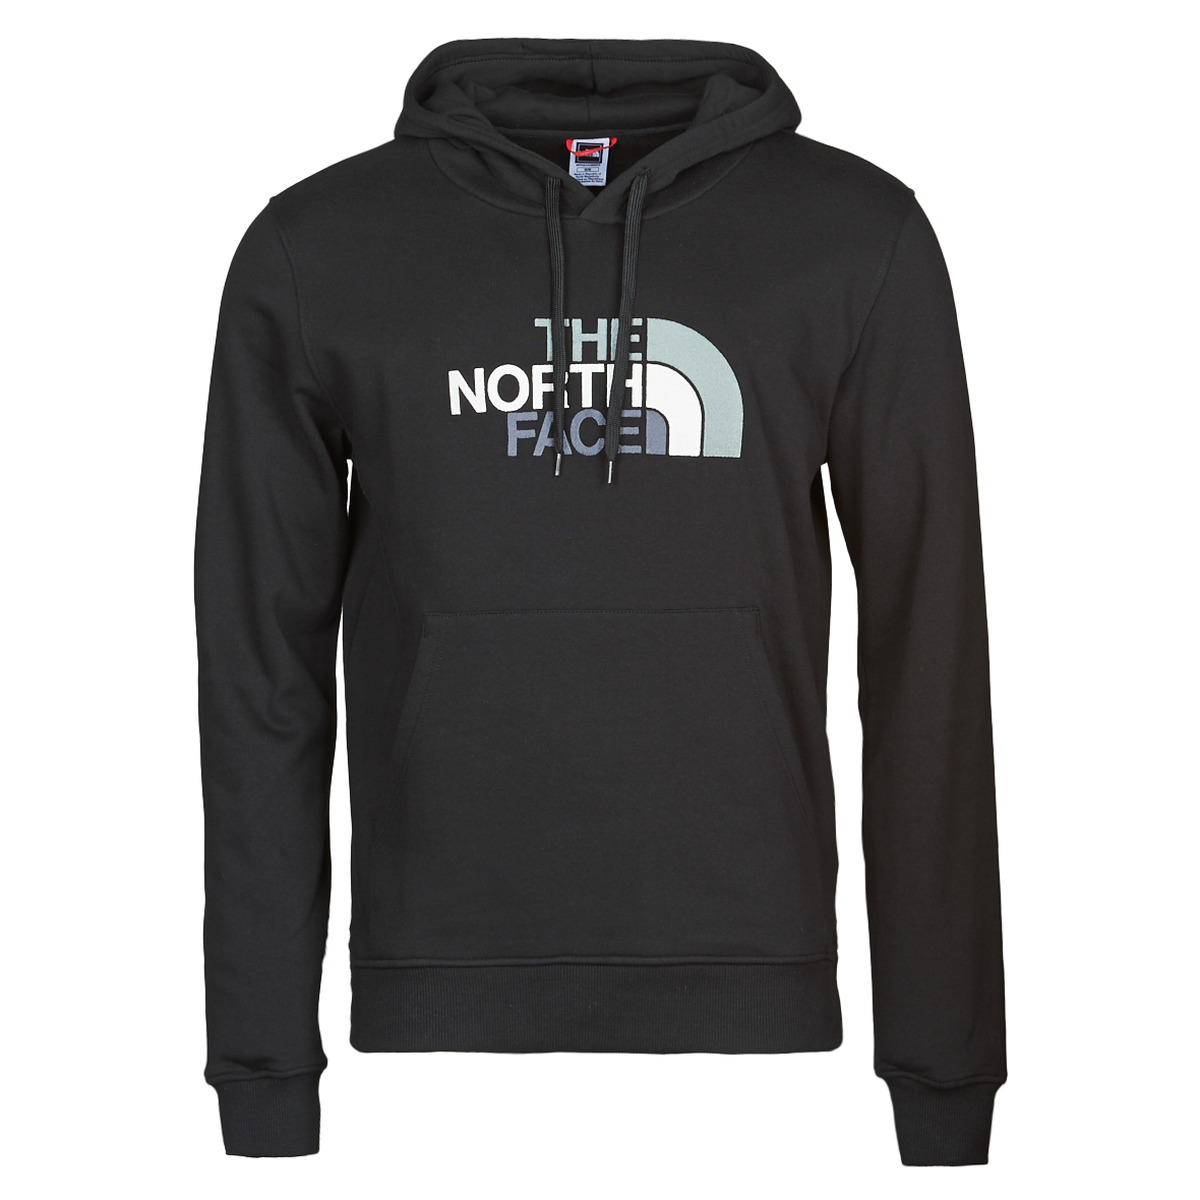 The North PULLOVER | delivery PEAK NET Black HOODIE Free Men - Spartoo Face sweaters ! - Clothing DREW